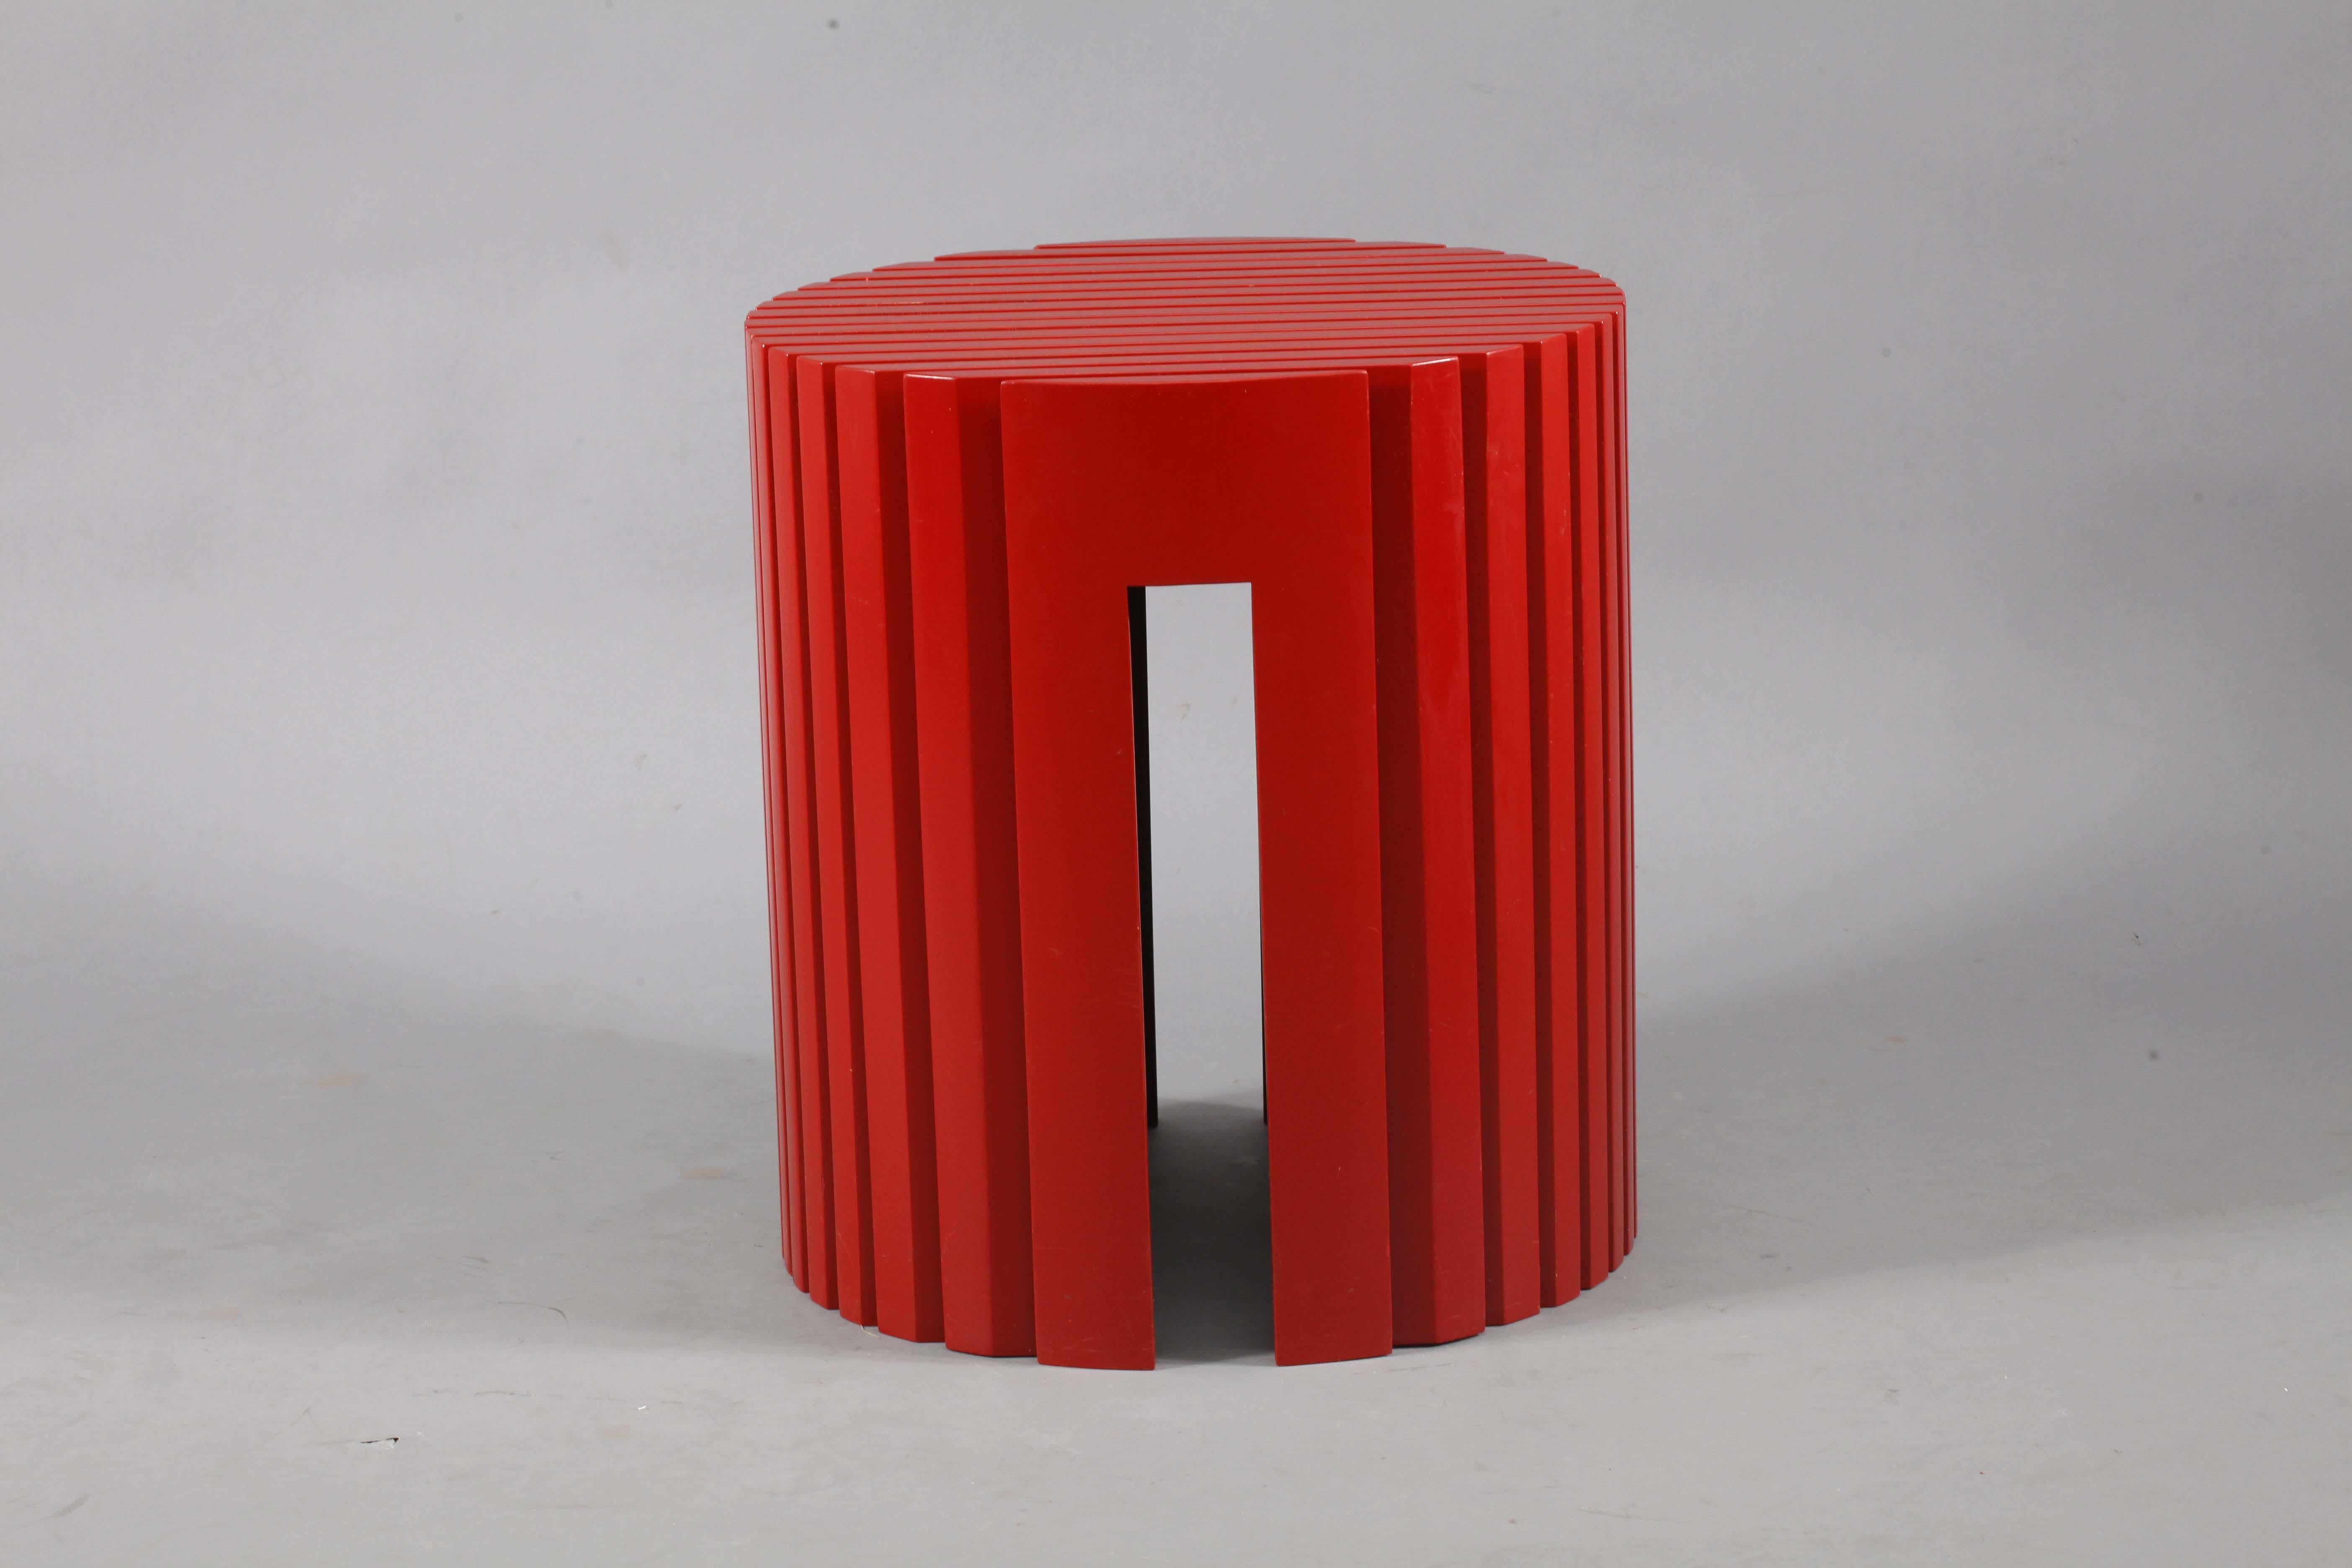 Round Postmodern architectural coffee table
Arch. Wieser
Architect Wieser made is adjucation by Viennese Professor Roland Rainer in Vienna, 1970.
Vienna, 1980
Red lacquered wood, chrome.